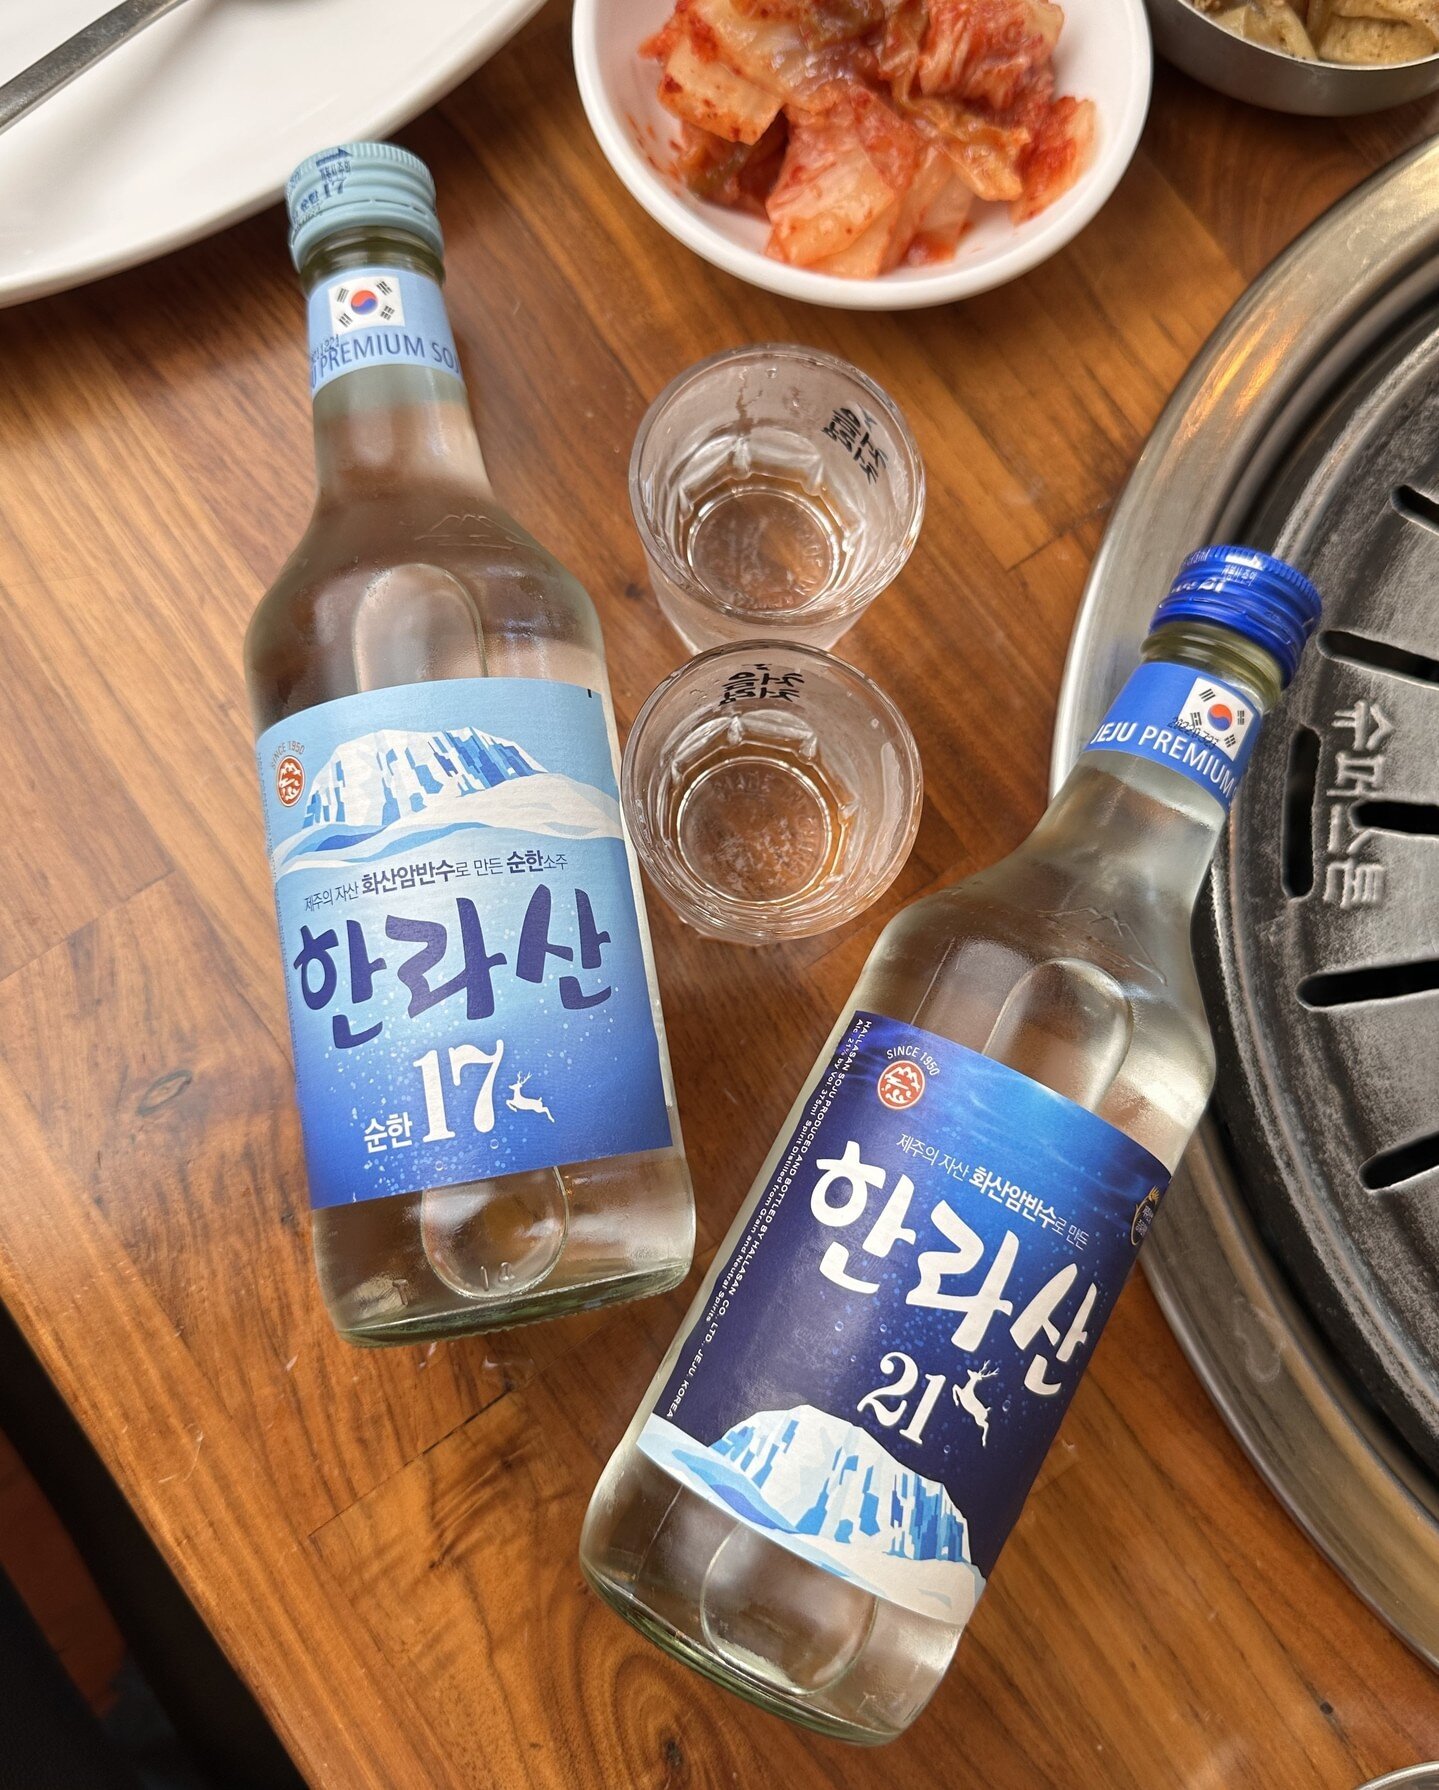 A drink with your friends to end a good day!❤️&zwj;🔥 A large variety of different alcoholic drinks. Cheers!🍻⁠
@songhakbbq⁠
📍356 S Western Ave Ste 201, Los Angeles, CA 90020⁠
.⁠
.⁠
#foodie #foodiereels #ayce #losangelesfoodie #koreanfood #meatlover